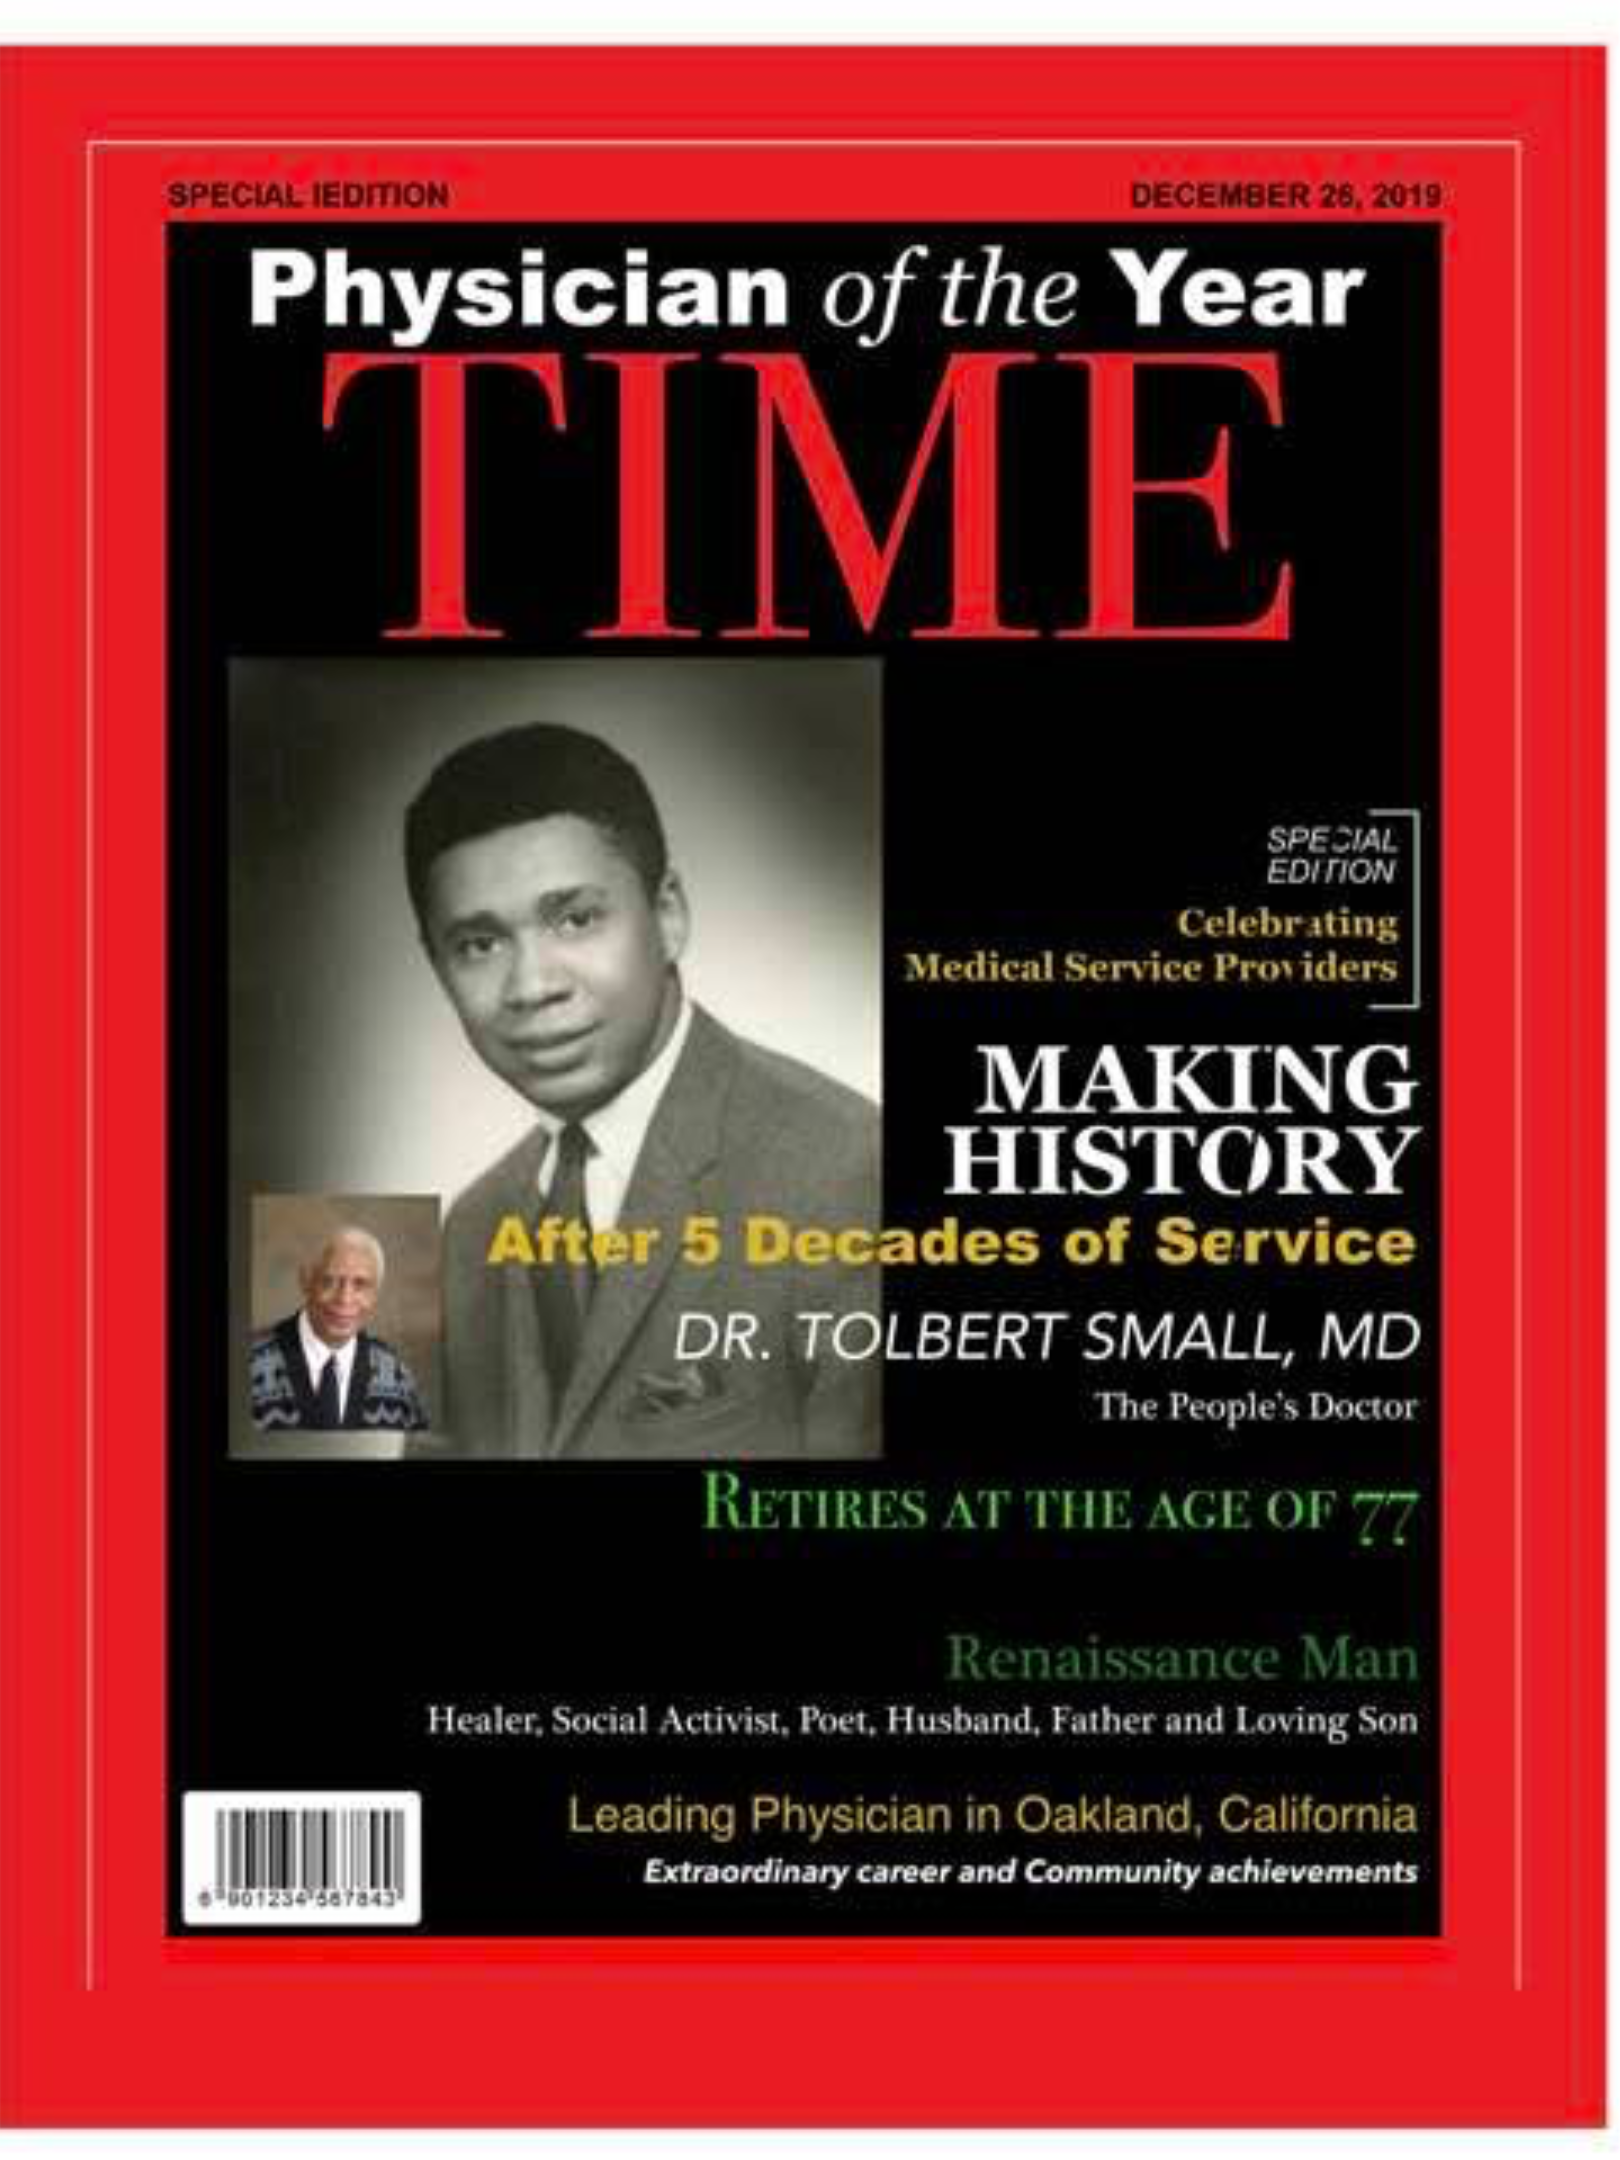 Time magazine-style tribute compliation from staff to Dr. Small